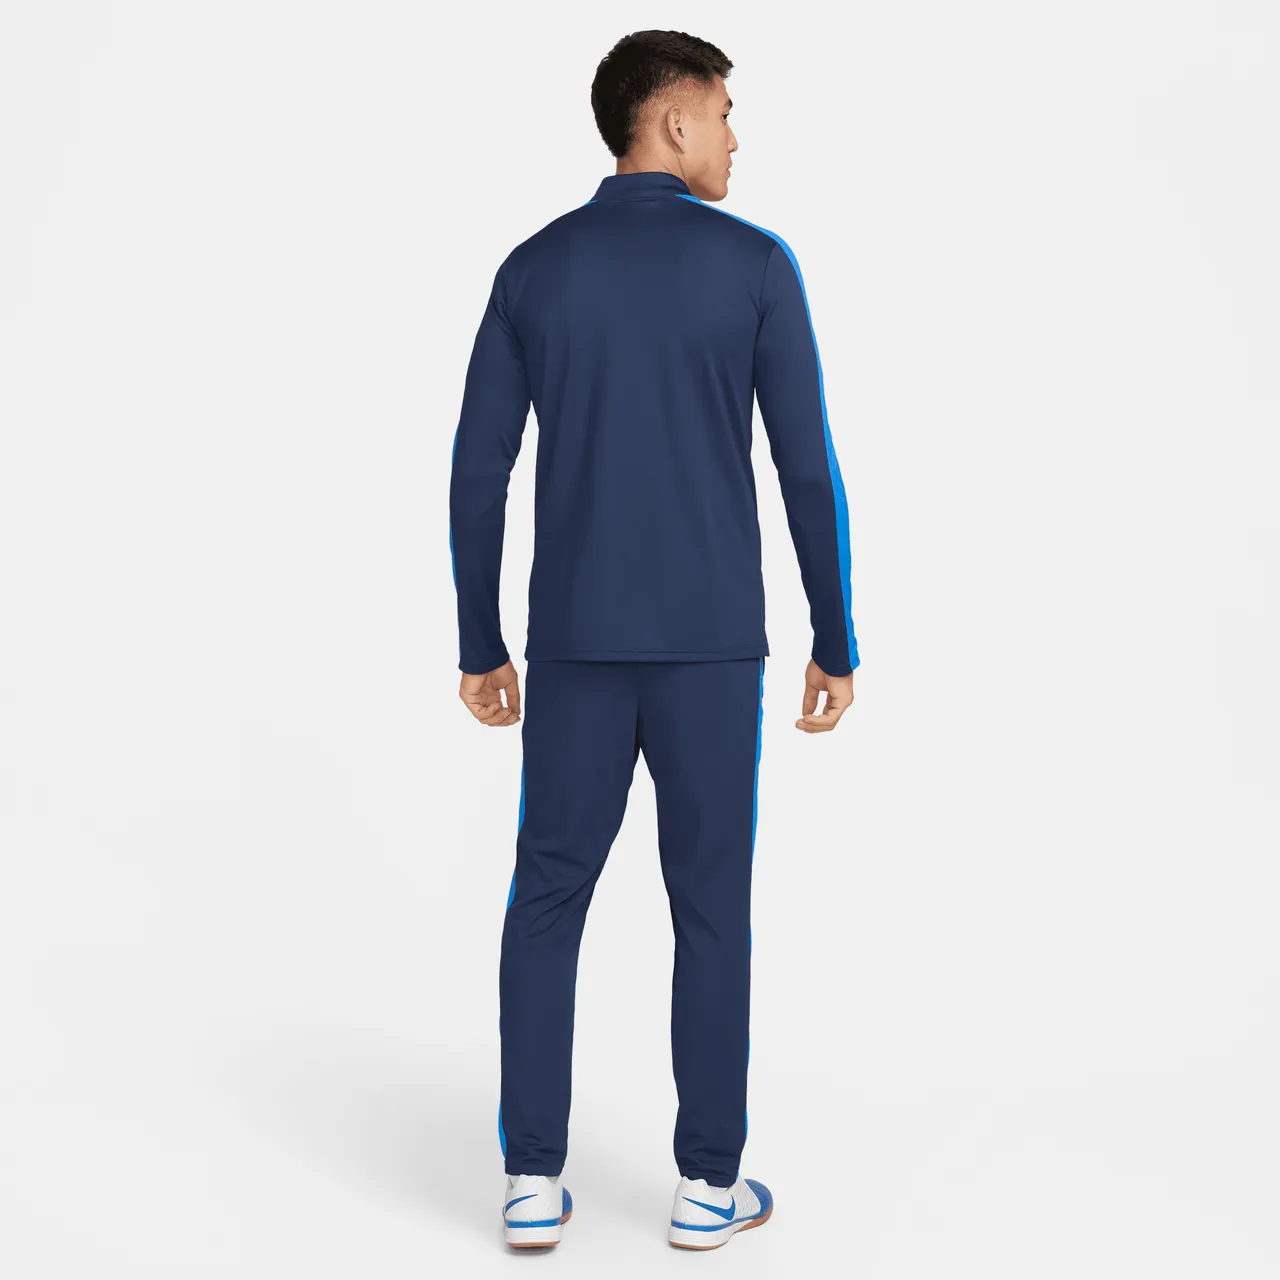 Nike Academy Men's Dri-FIT Football Tracksuit - Blue - Polyester